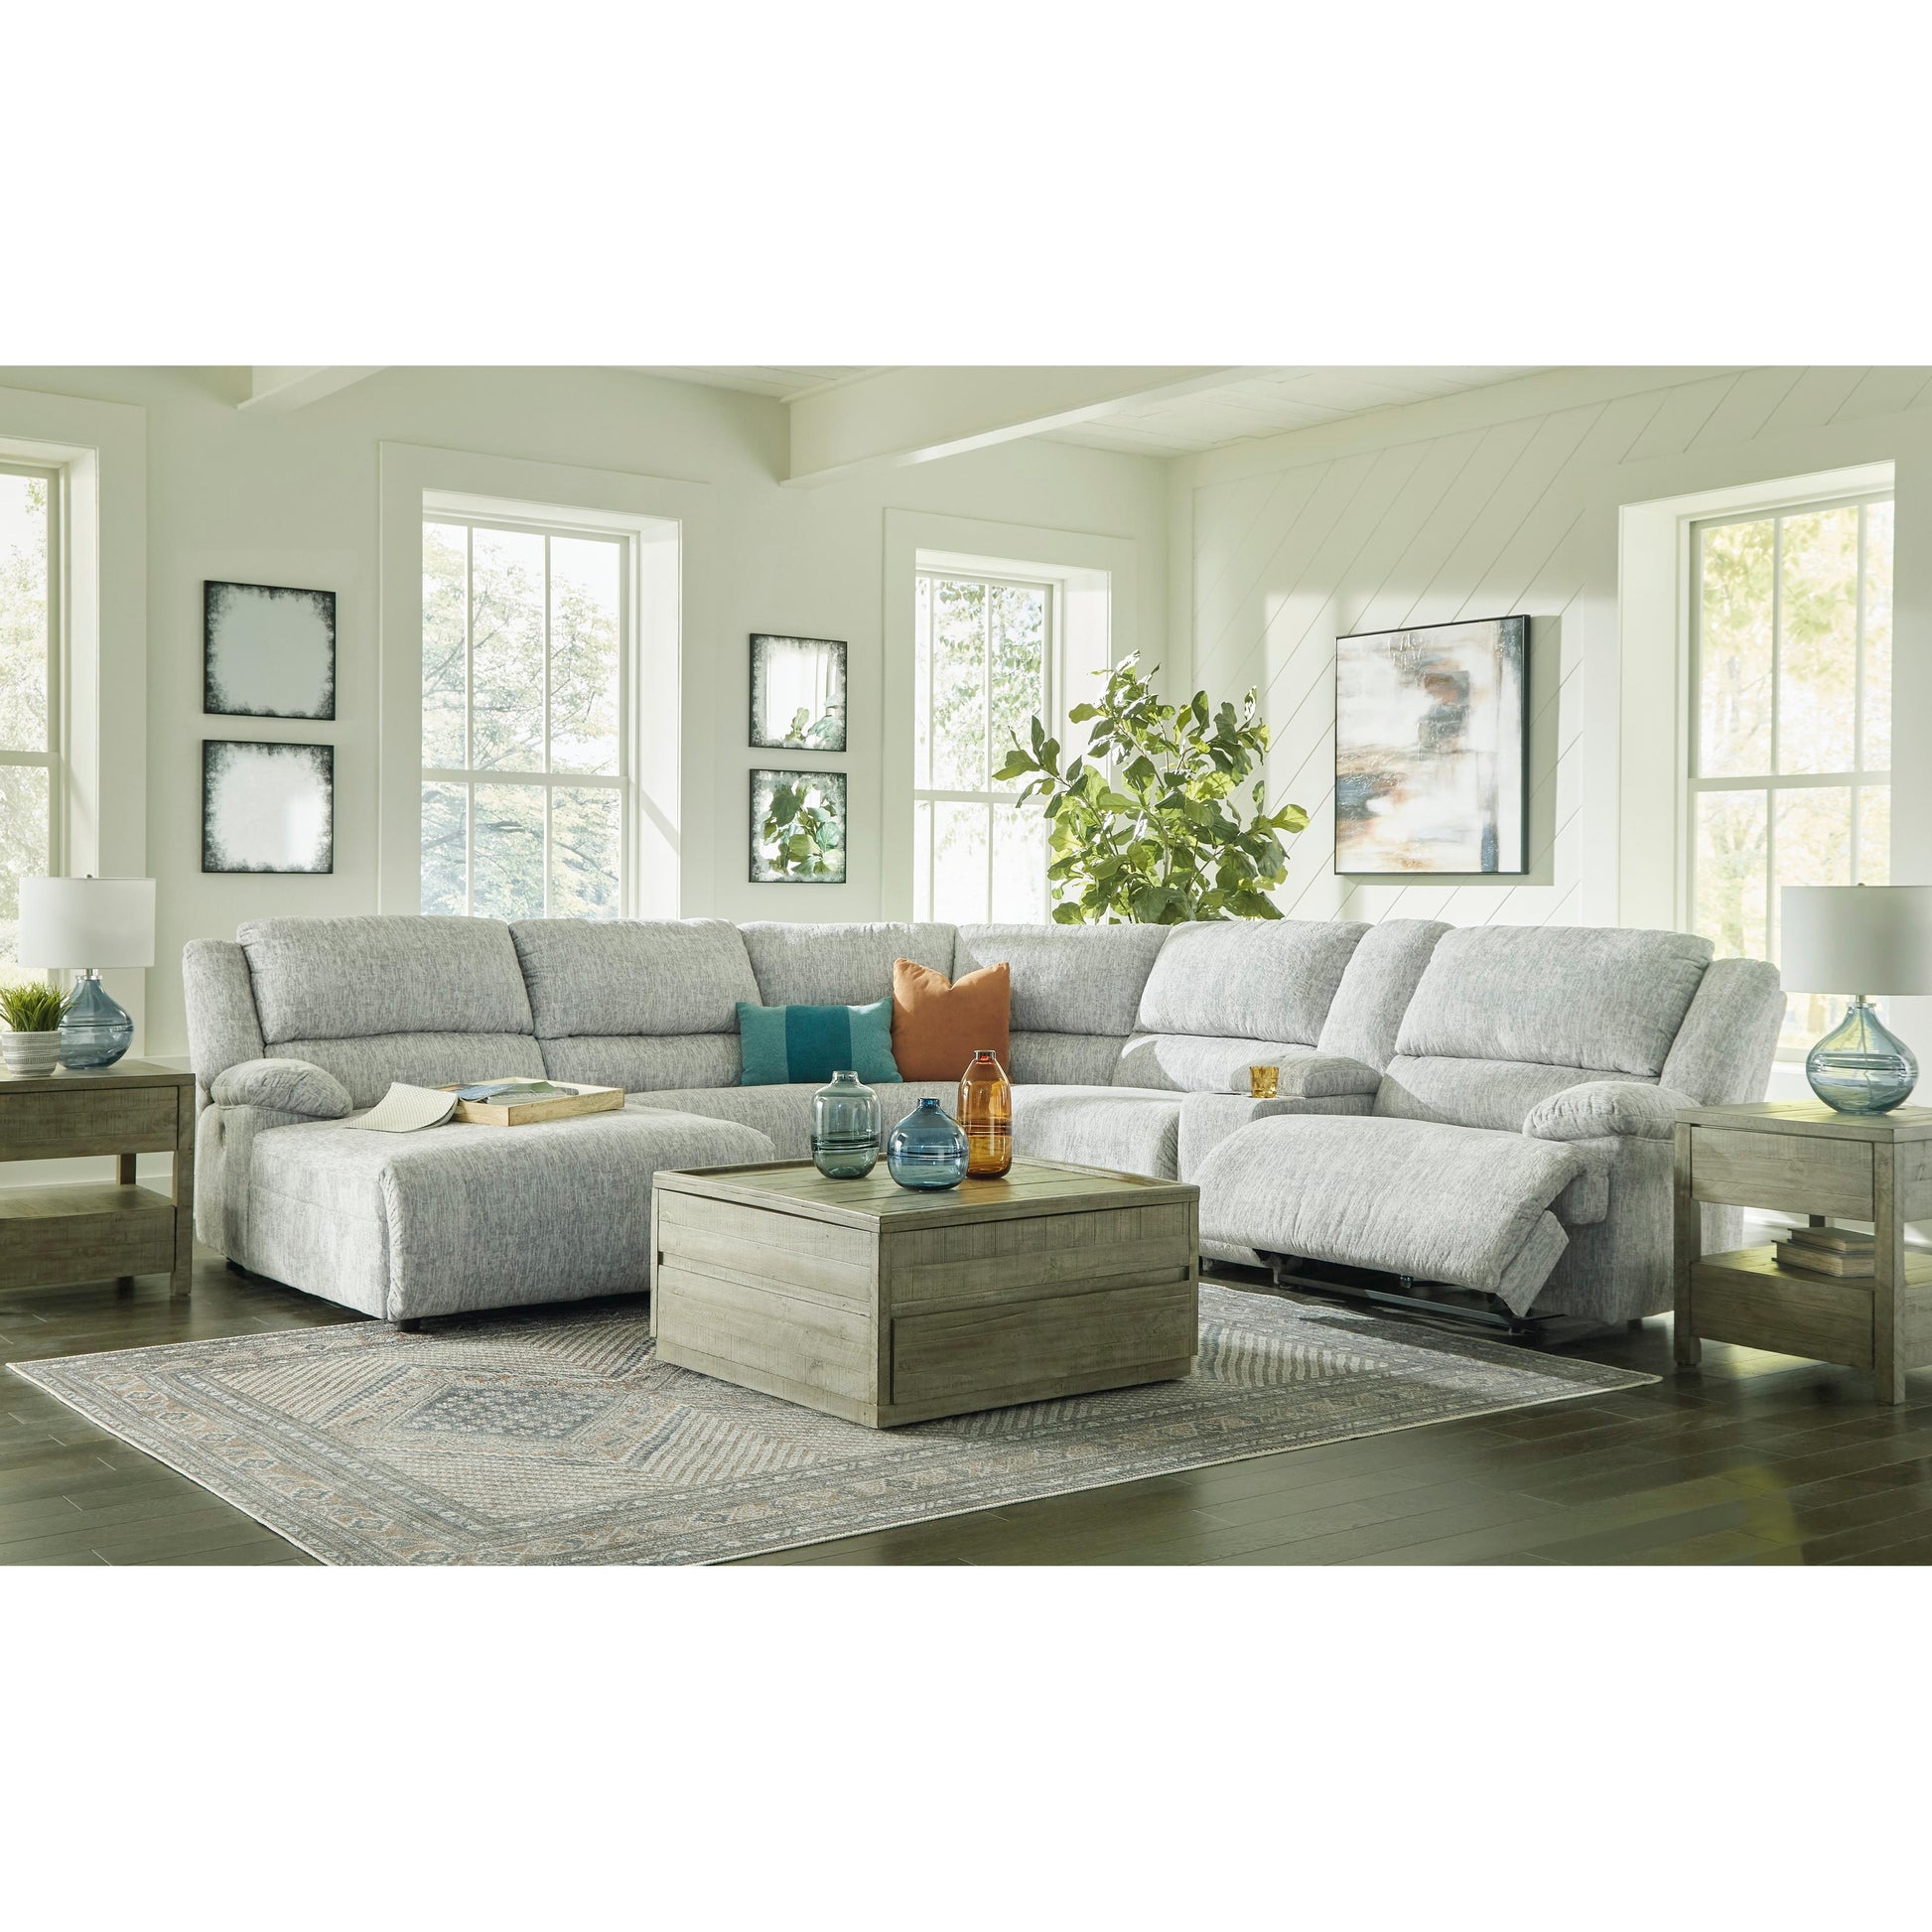 Signature Design by Ashley McClelland Power Reclining Fabric 6 pc Sectional 2930279/2930246/2930277/2930219/2930257/2930262 IMAGE 5